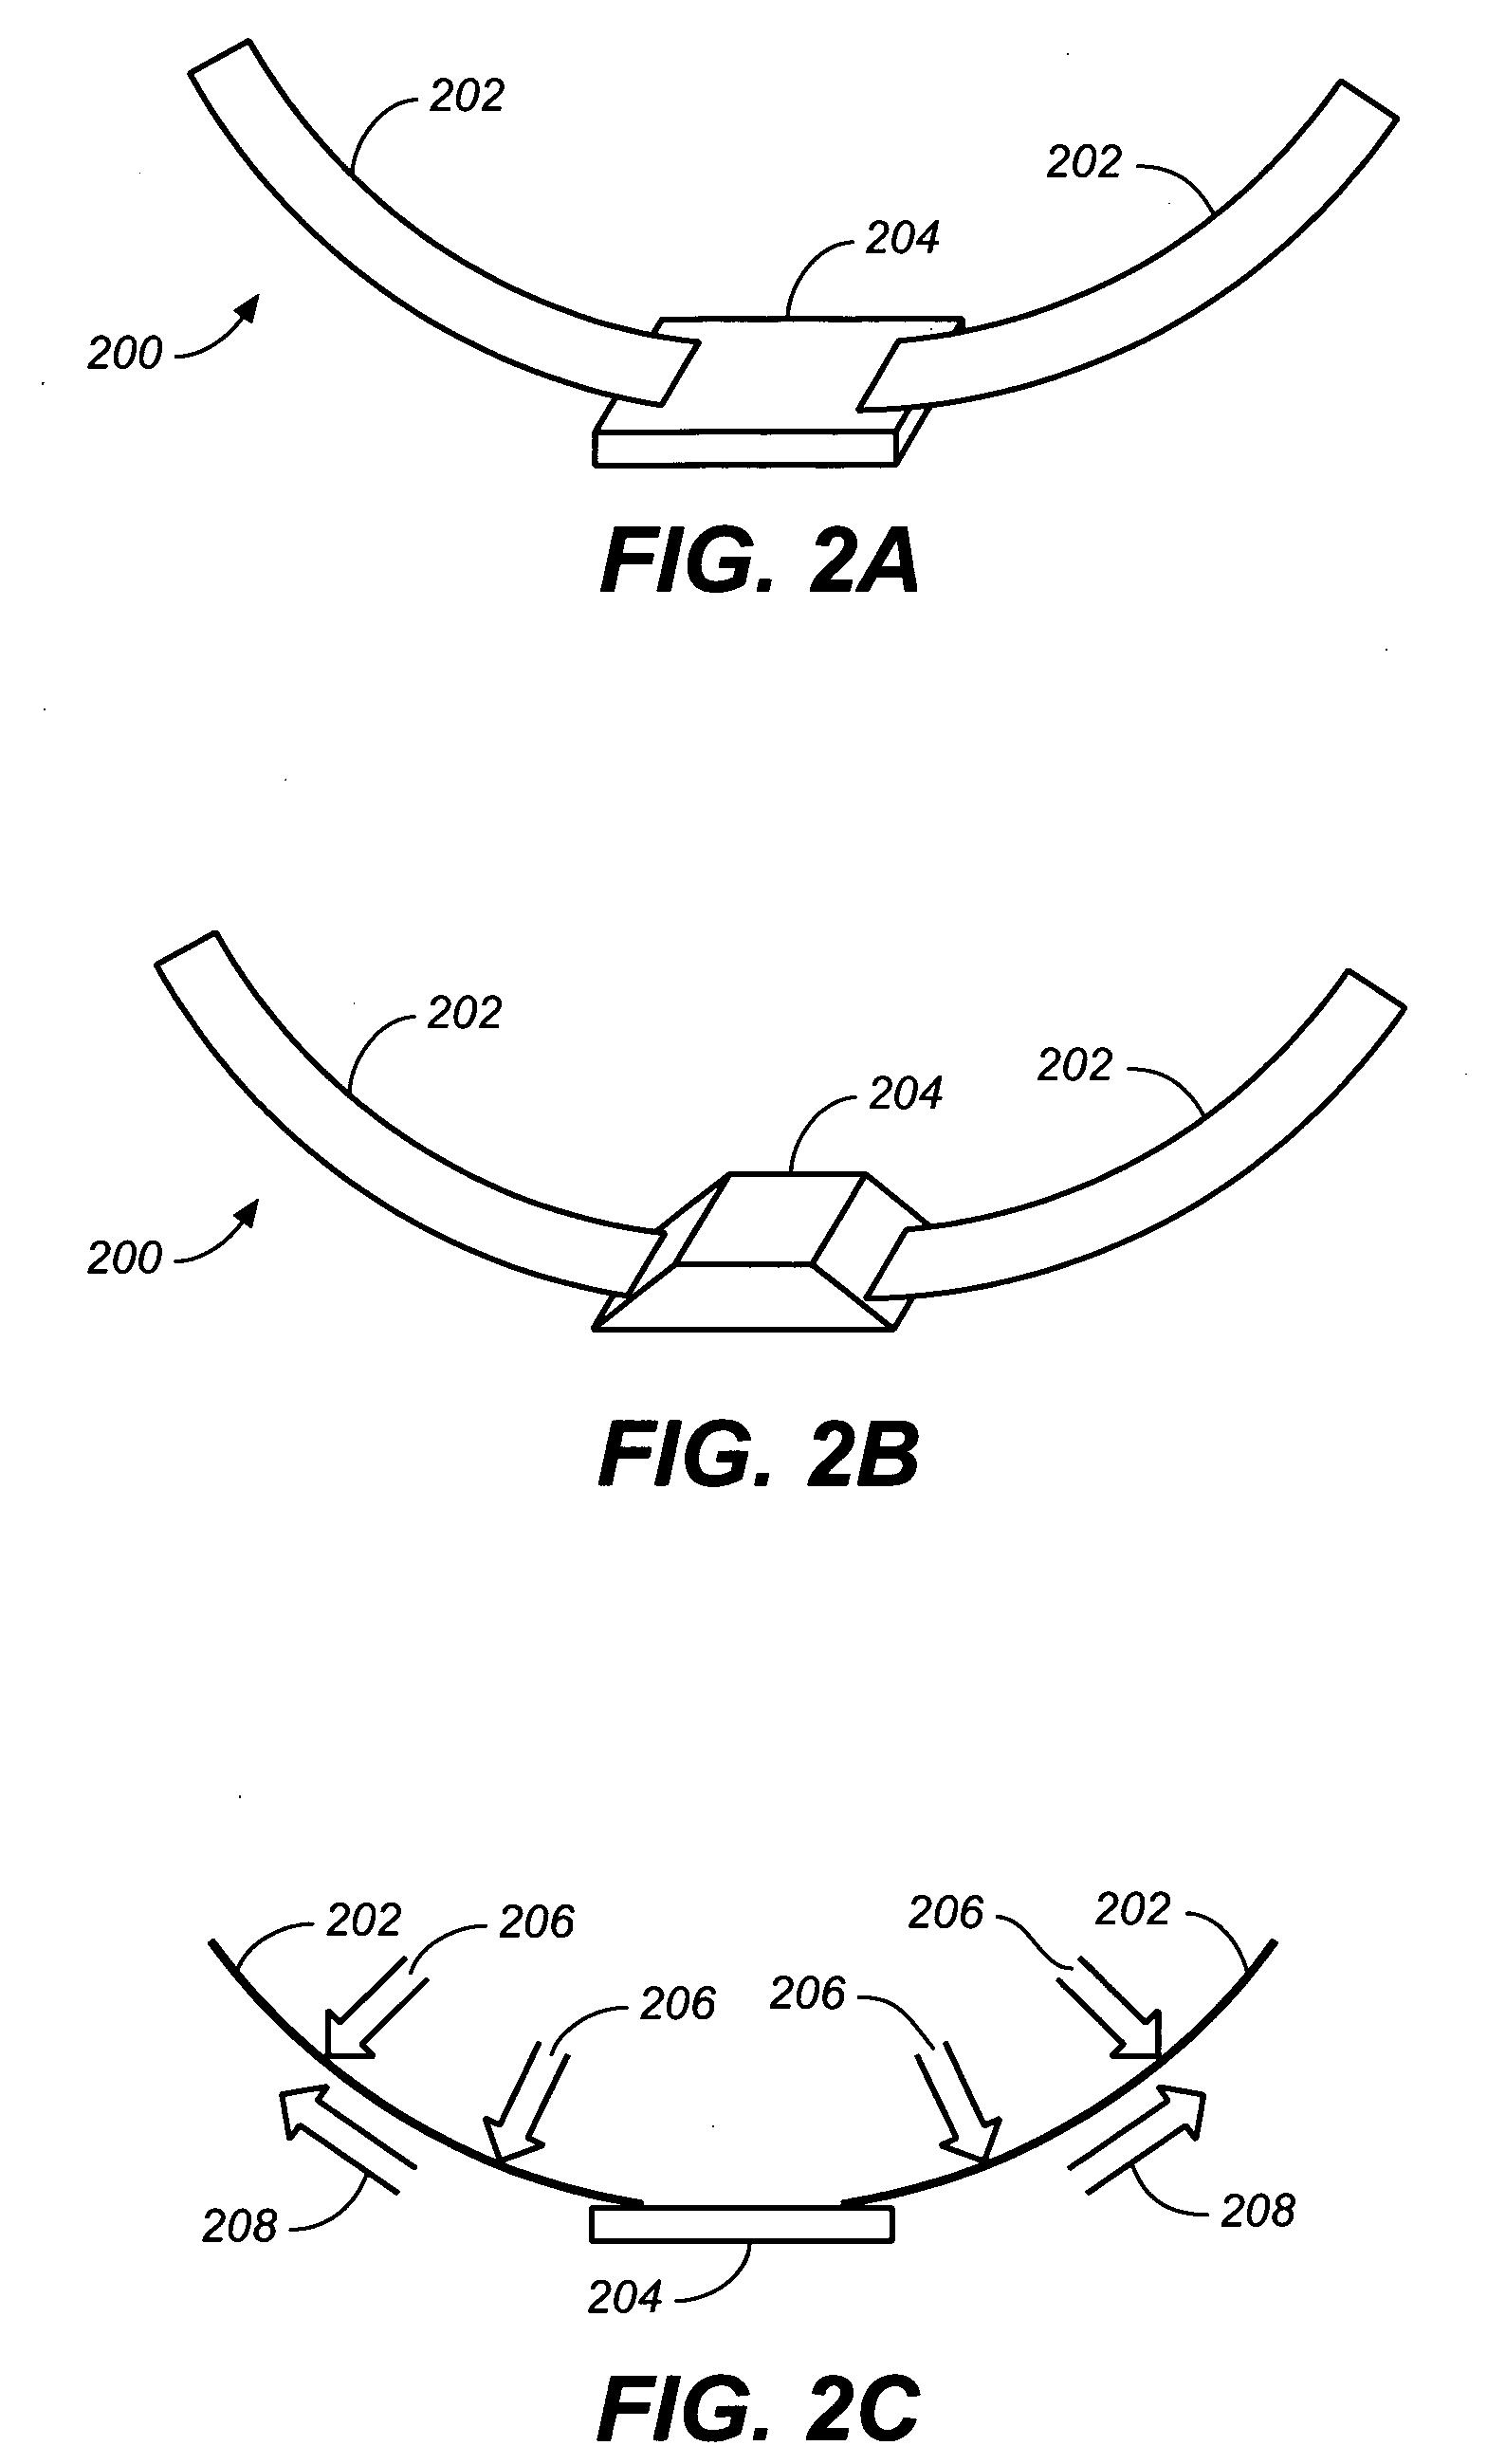 Dynamic and adjustable support devices